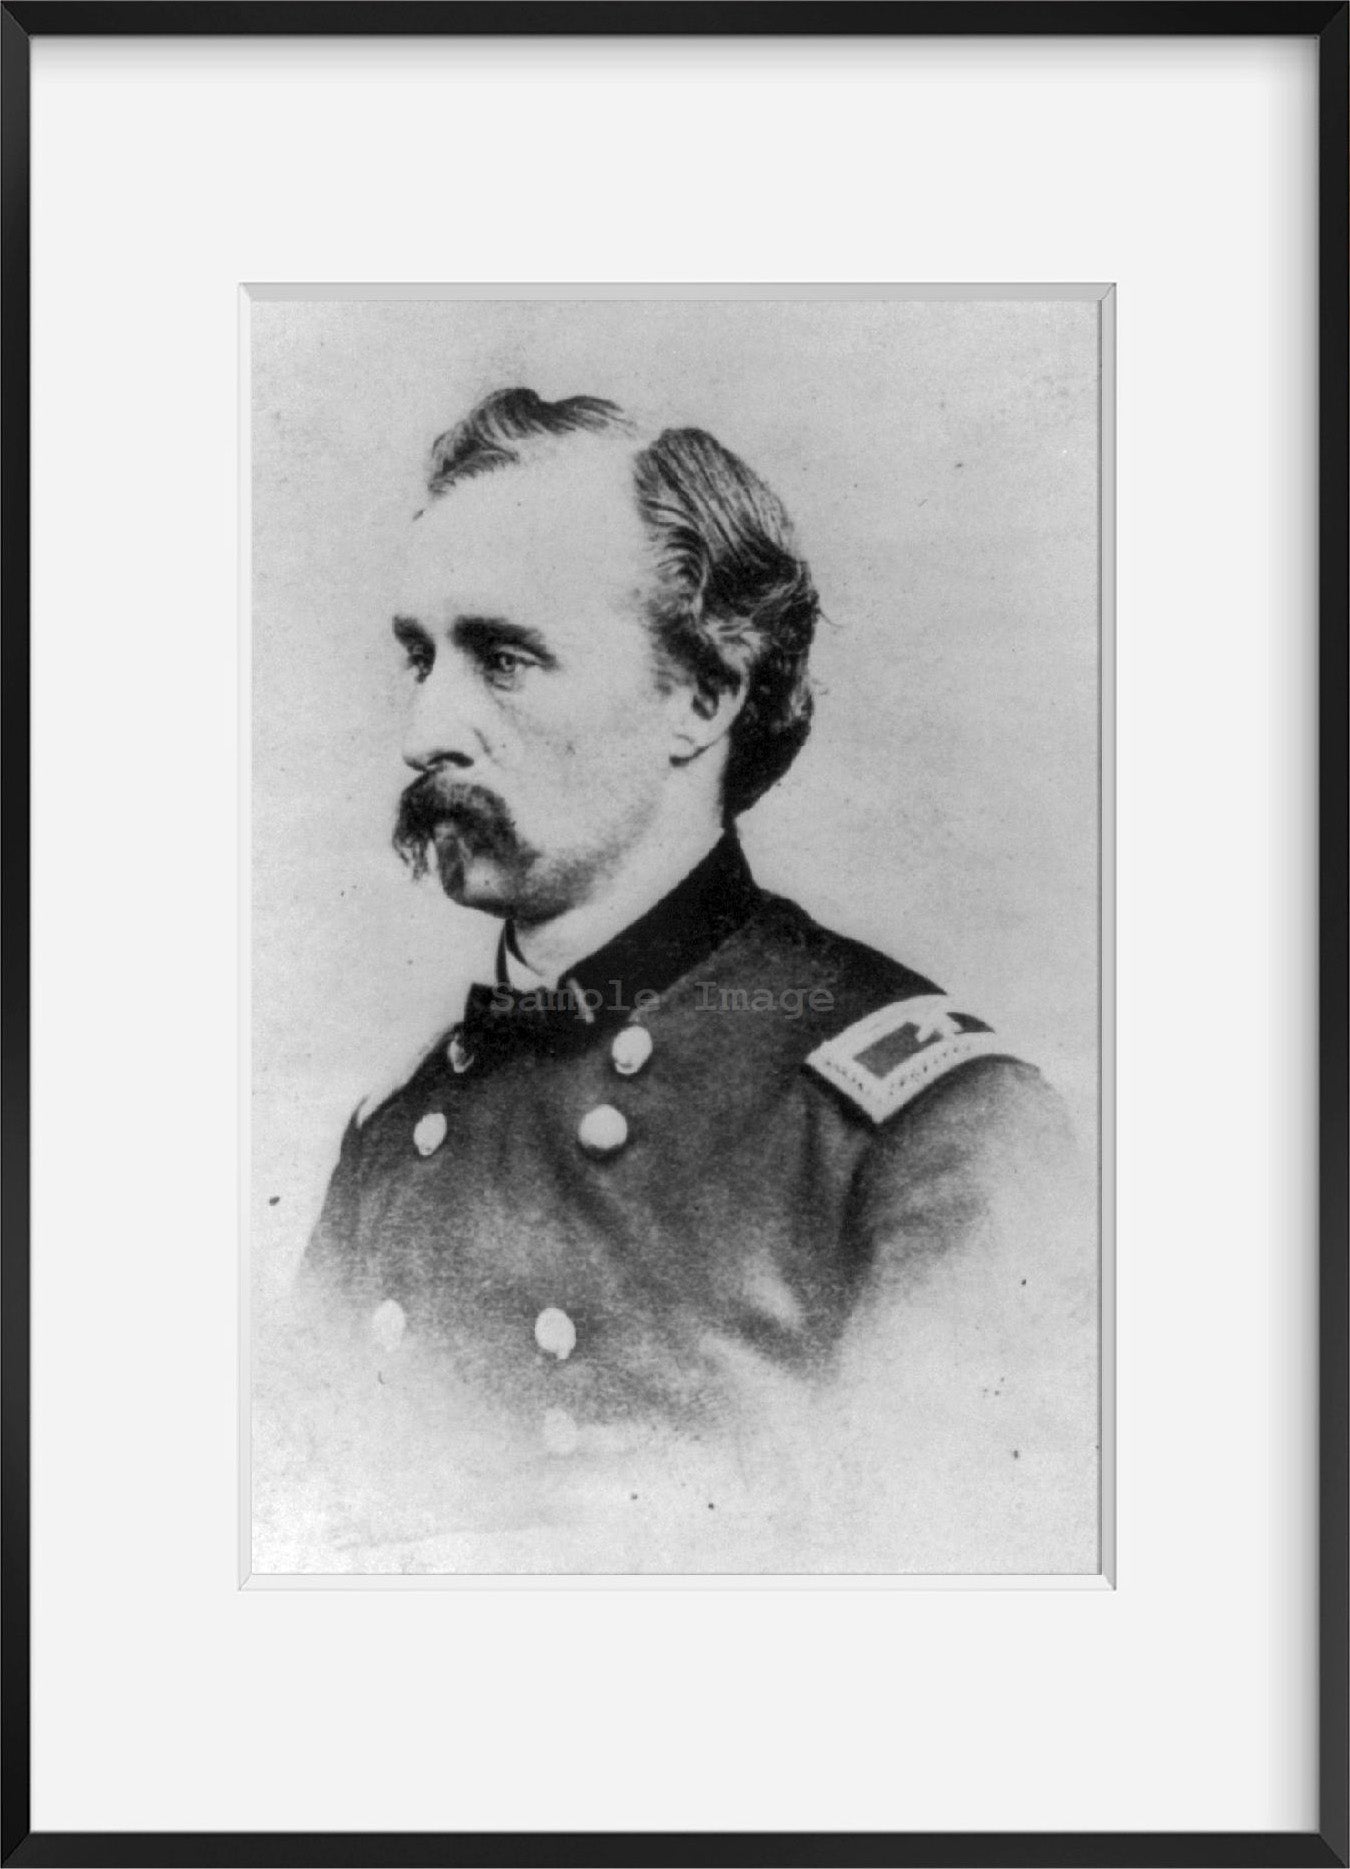 Photo: George Armstrong Custer, 1839-1876, US Army Officer, Cavalry Commander, Civil